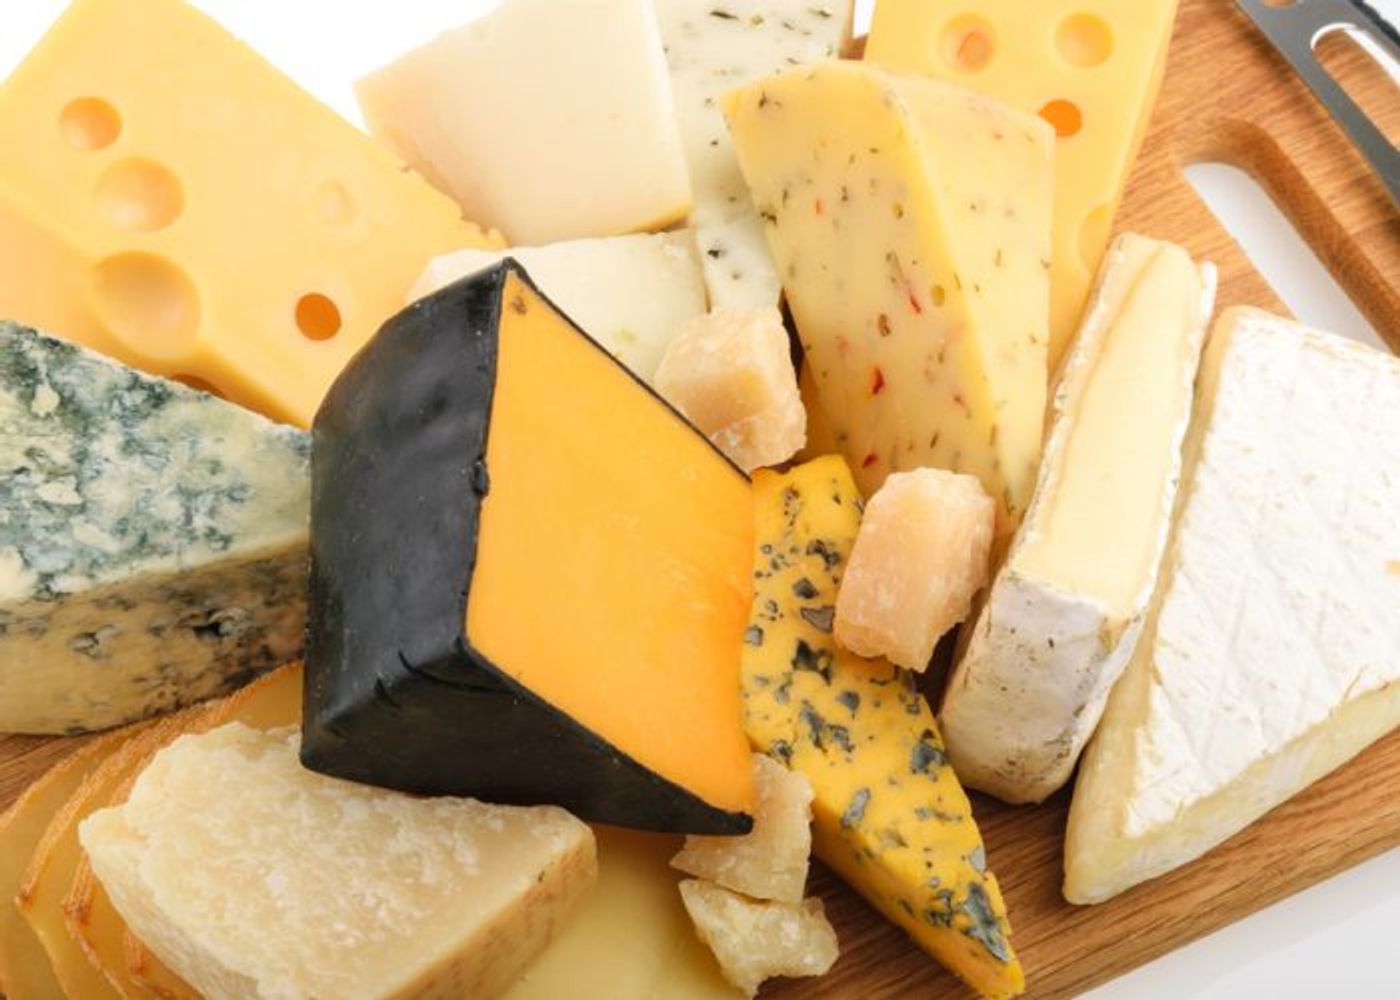 Microbes give cheese distinct tastes and smells.